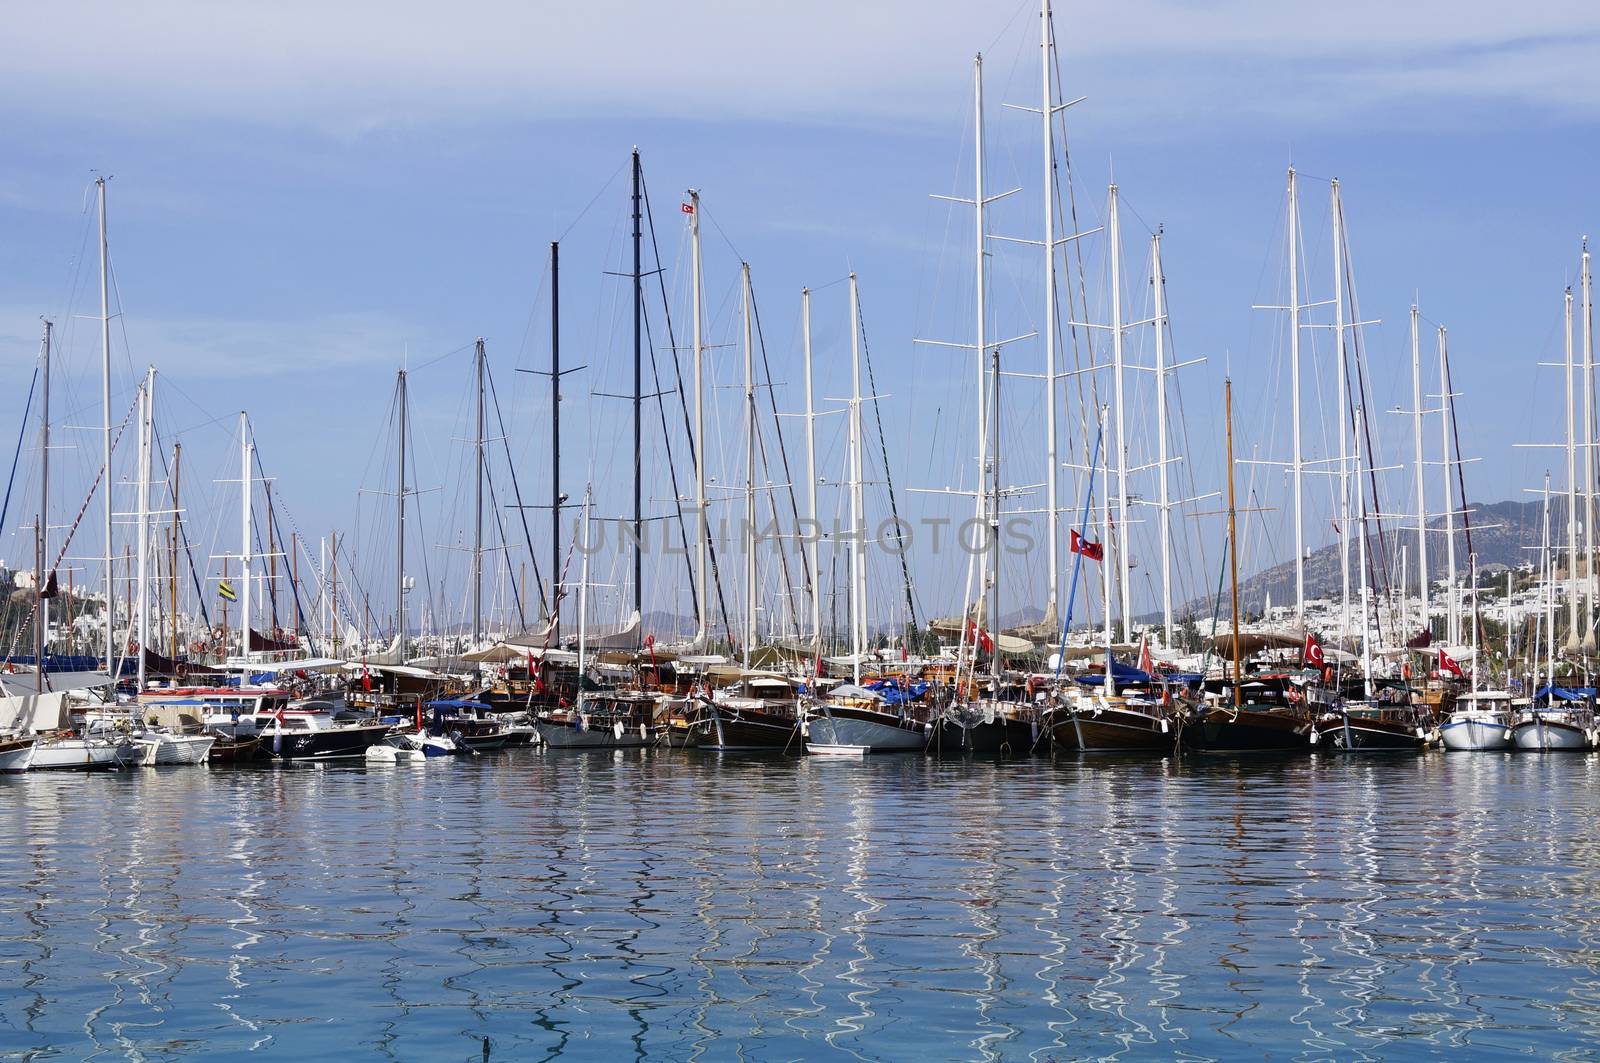 Boats and yachts parked at sea port in Bodrum, Turkey